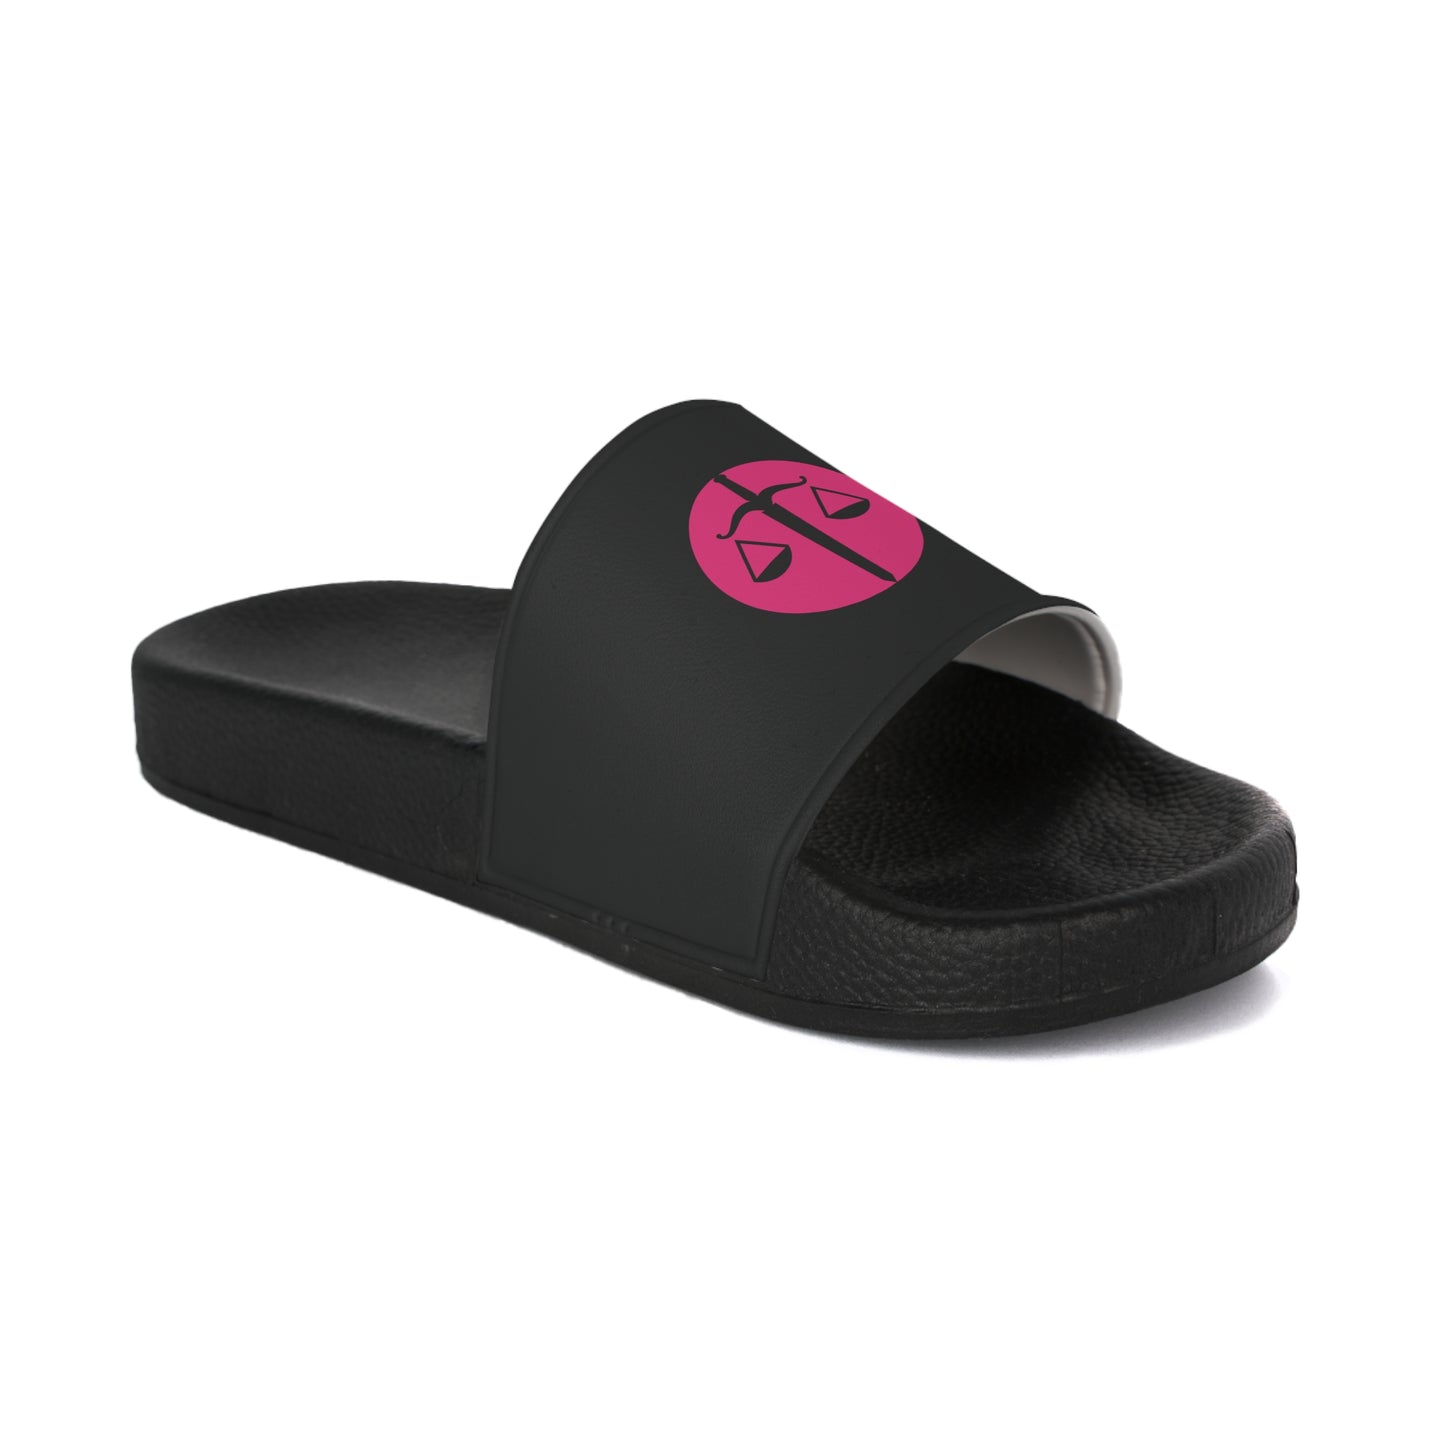 Sword and Scale Women's Slide Sandals